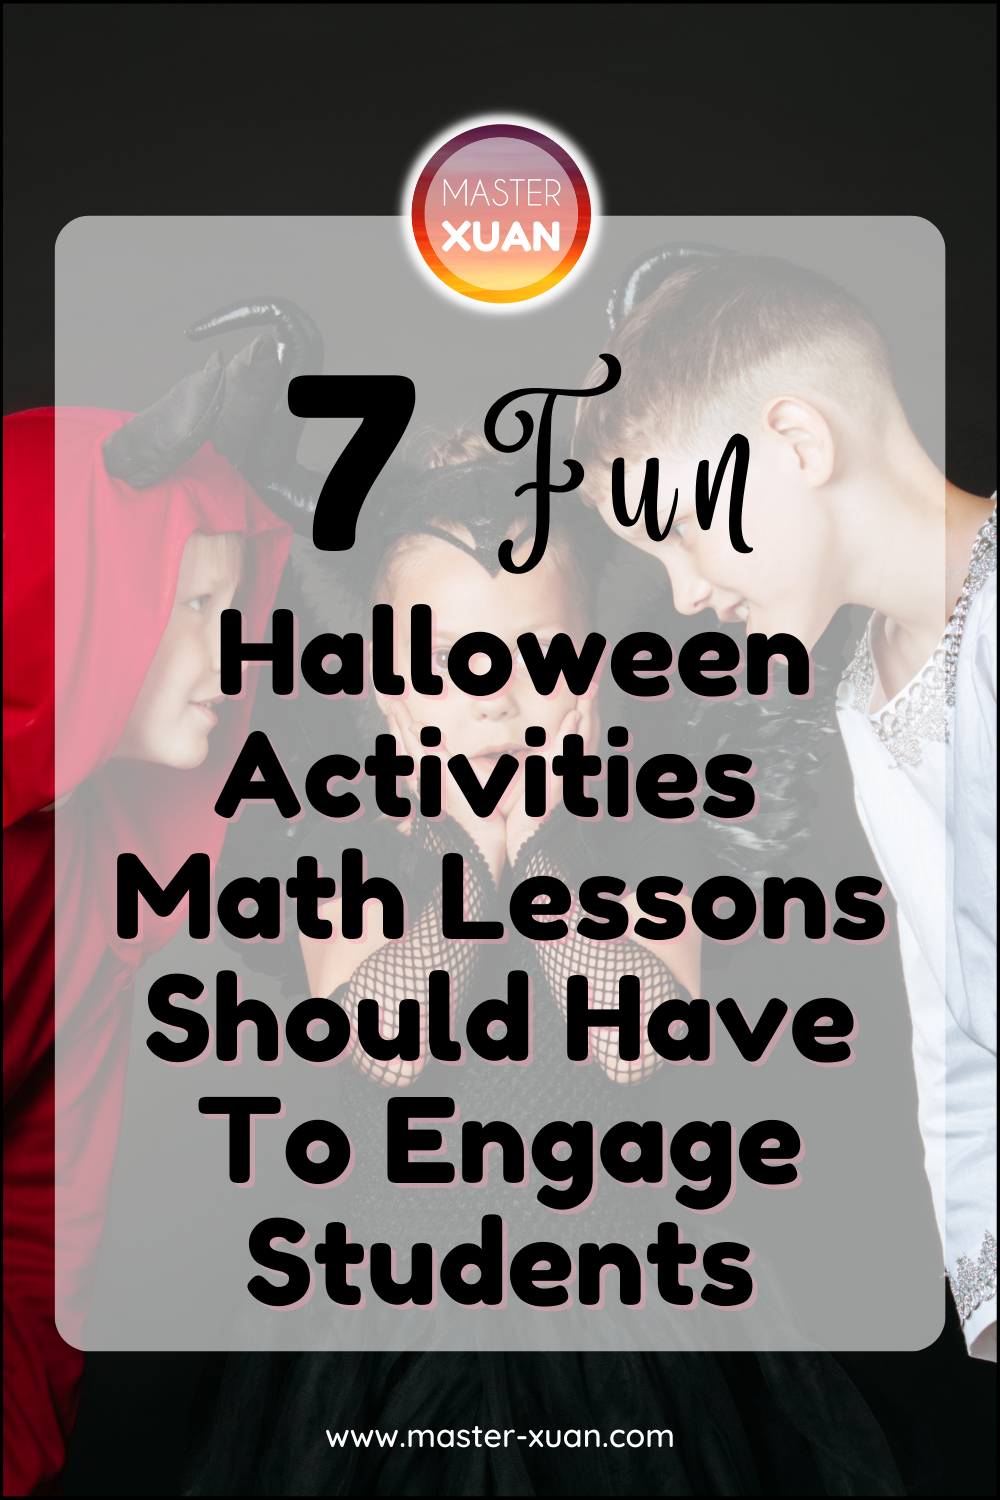 7 fun halloween activities math lessons should have to engage students